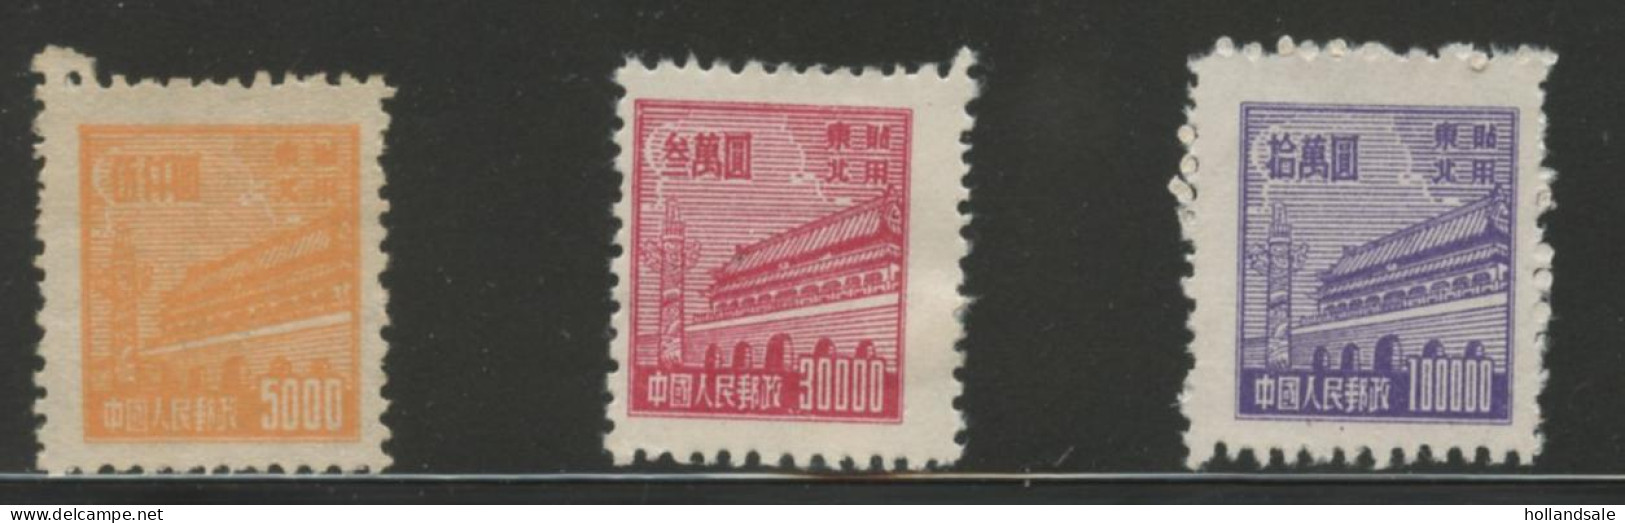 CHINA NORTH  EAST - 1950 Tien An Men Stamps From RN2 (I). MICHEL # 186-188. Unused. - Noordoost-China 1946-48